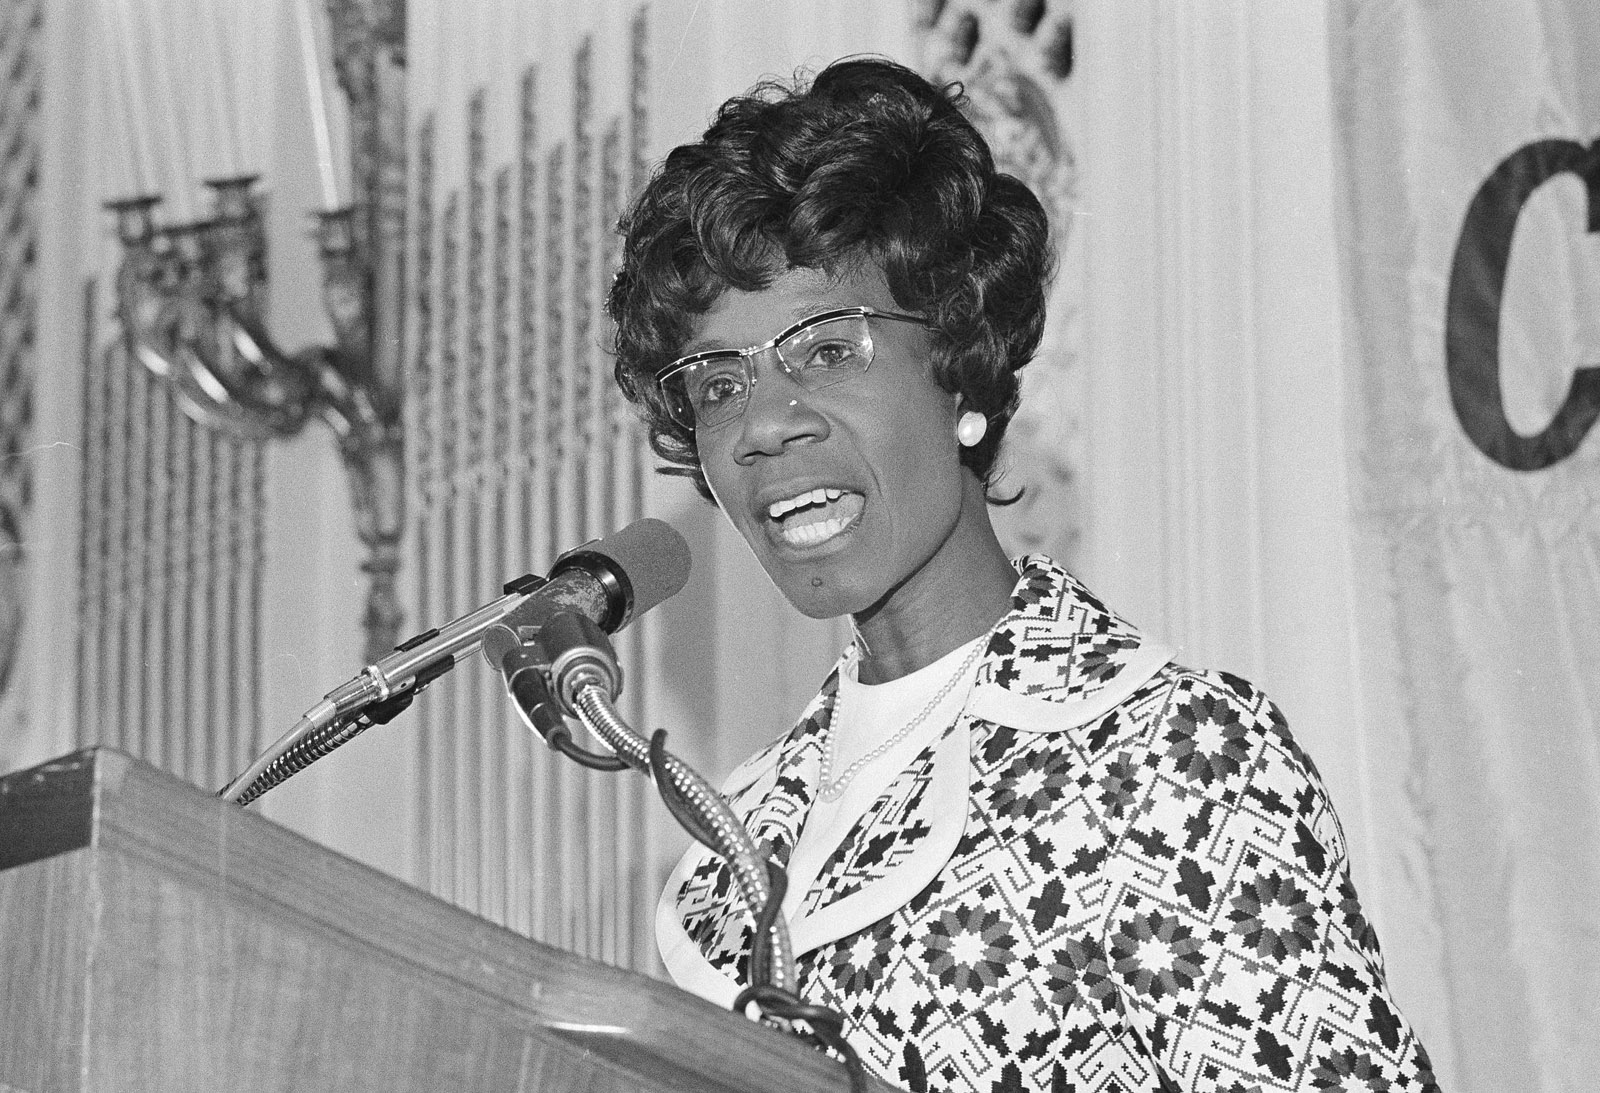 Shirley Chisholm, Democratic Congresswoman seeking the nomination for president, makes a point during a speech in San Francisco on Tuesday, May 16, 1972.   Under close guard from the secret service, Mrs. Chisholm was addressing the Commonwealth Club luncheon where she asked "How many more assassinations..before we realize the need to control weapons."   (AP Photo/ Richard Drew)